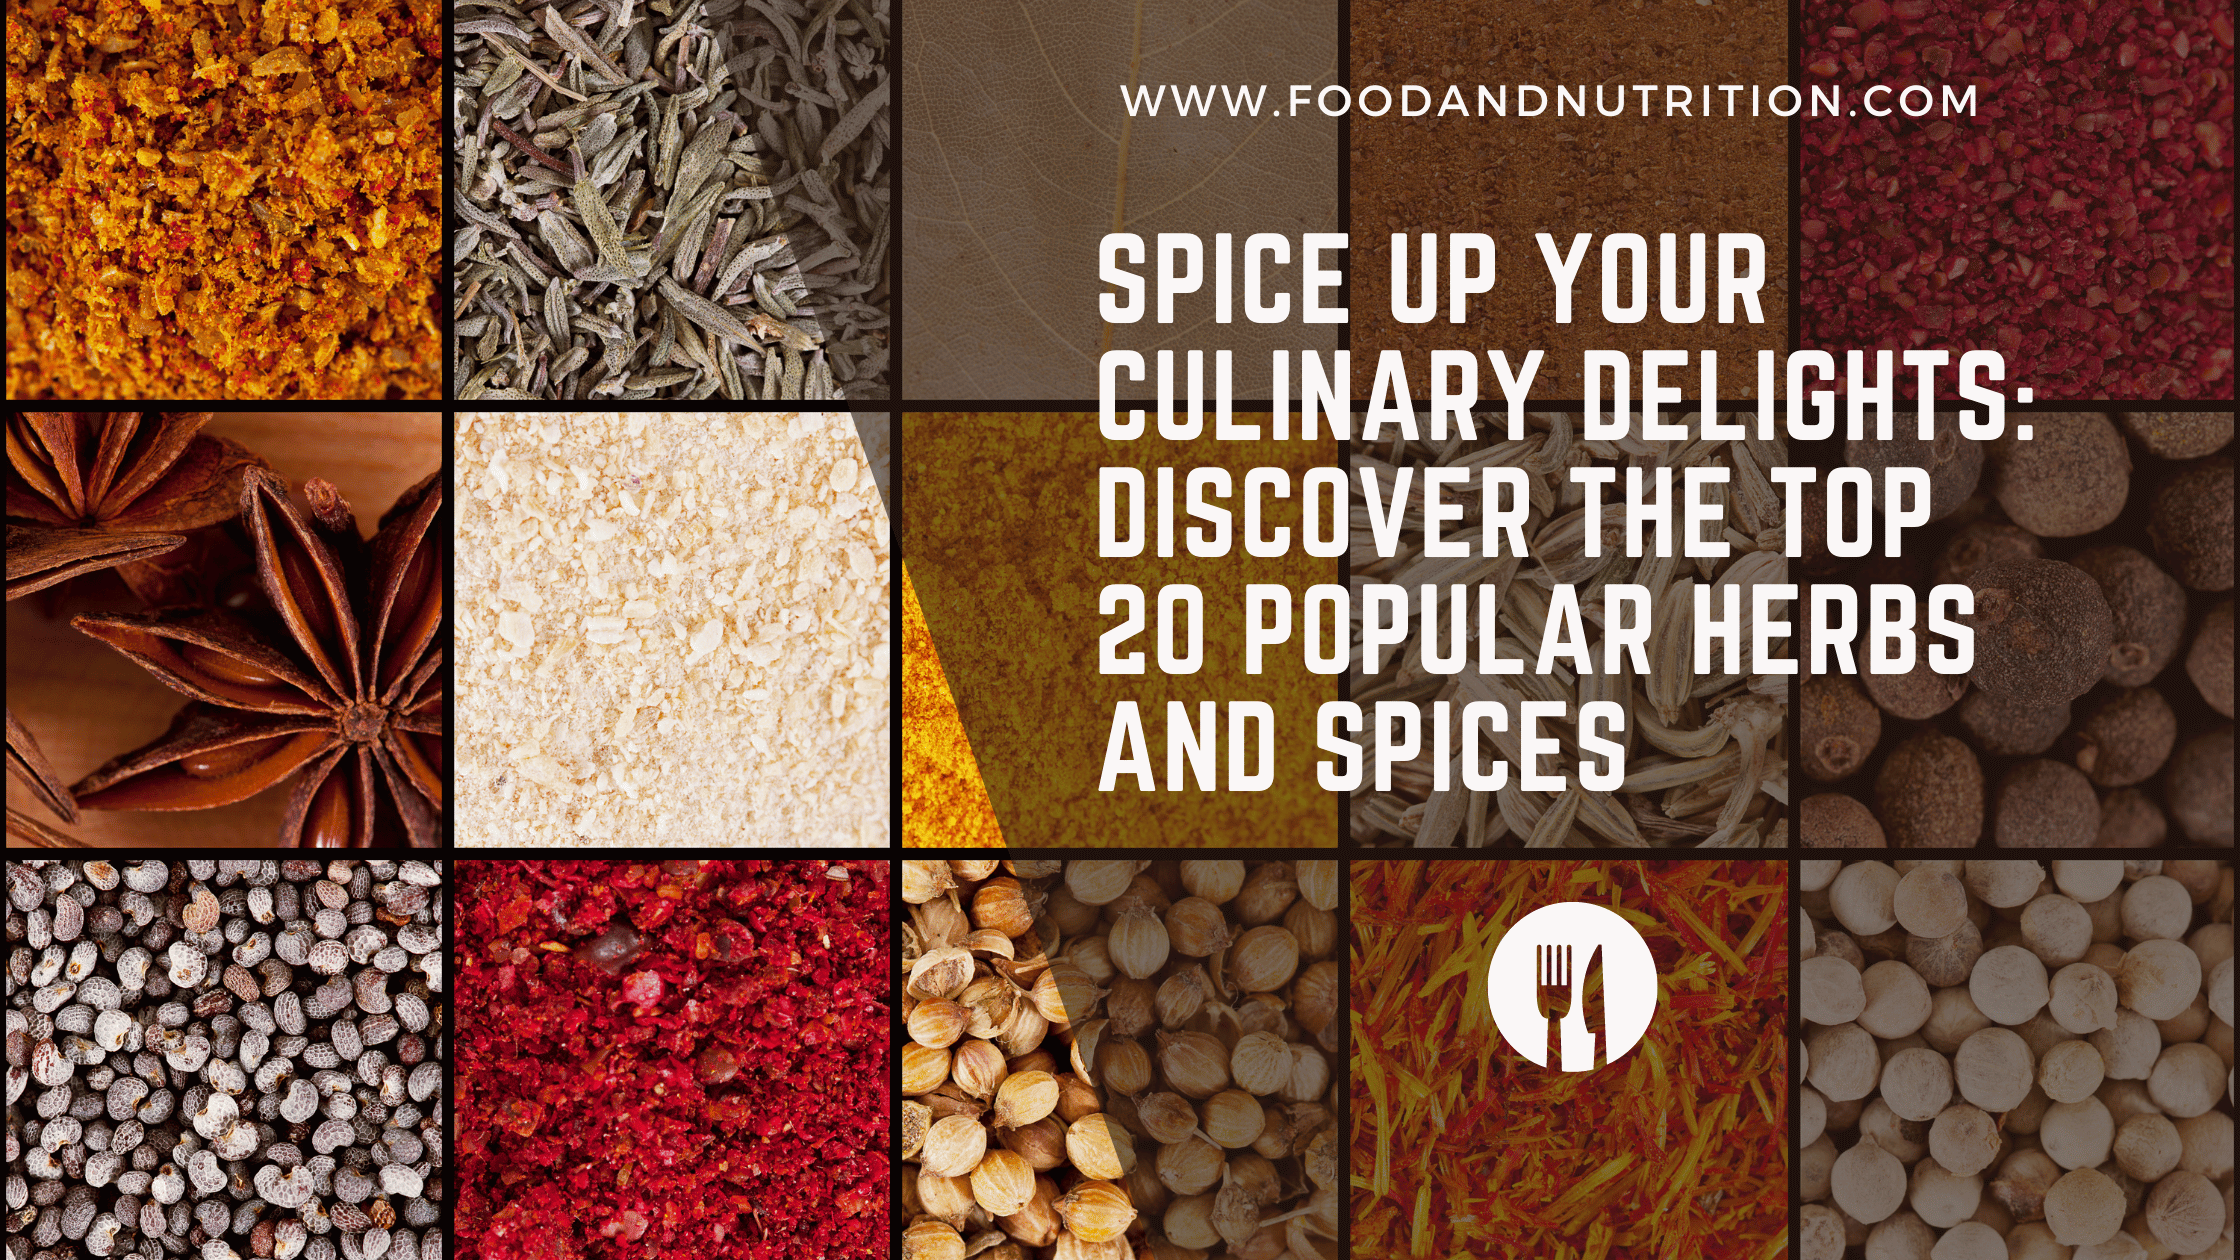 Spice Up Your Culinary Delights: Discover the Top 20 Popular Herbs and Spices